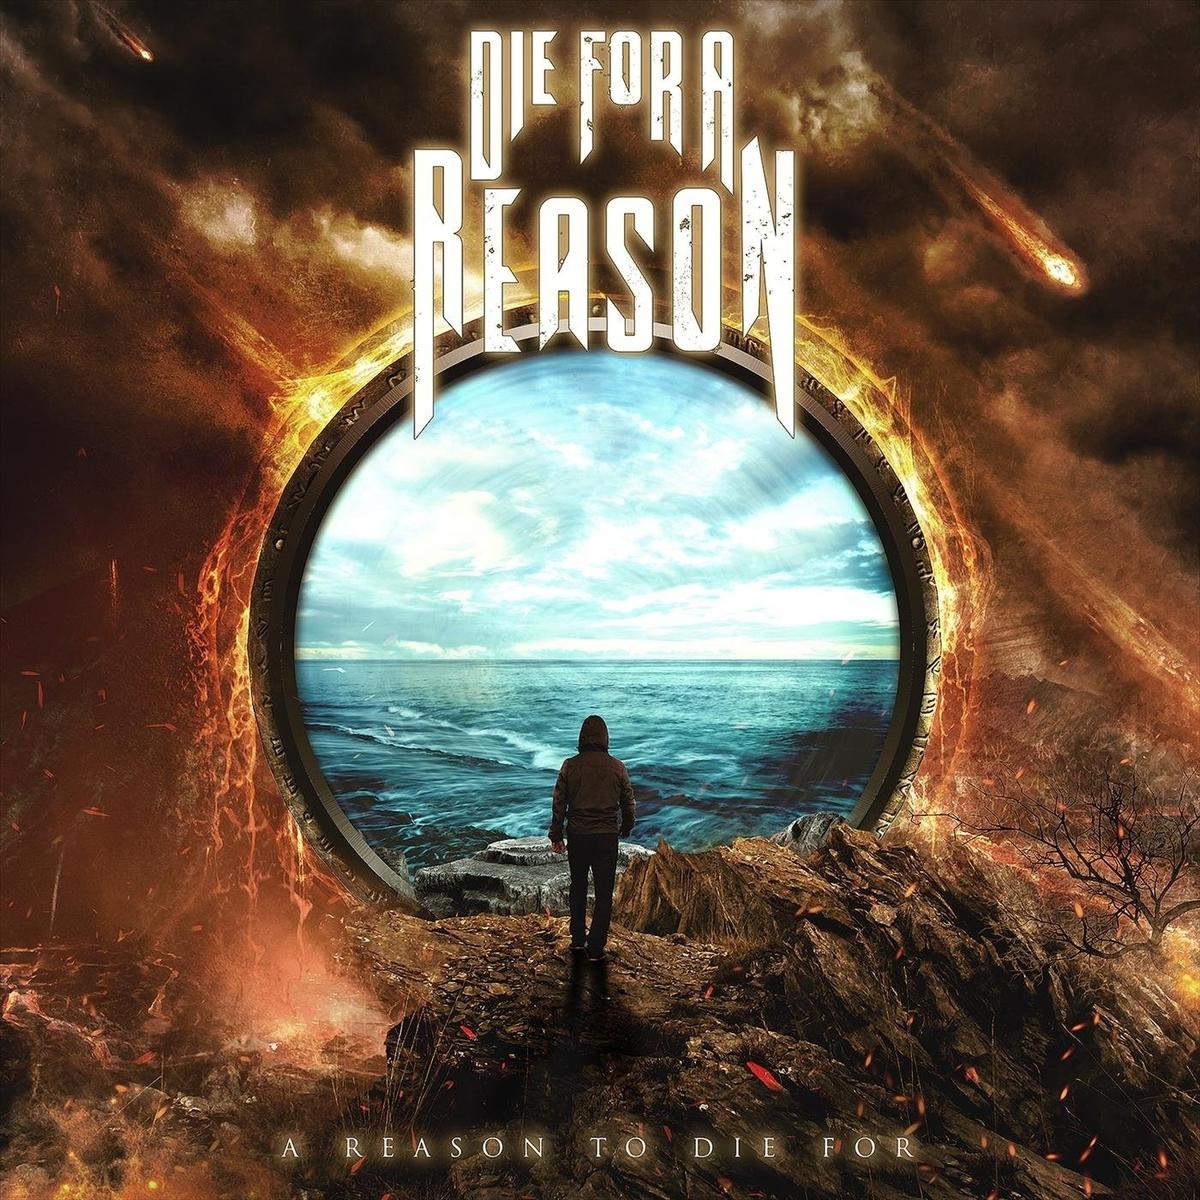 Come to reason. 2013 - A Life to die for. Stereoside Stereoside 2010. My reason to die. My reason to die Cover.